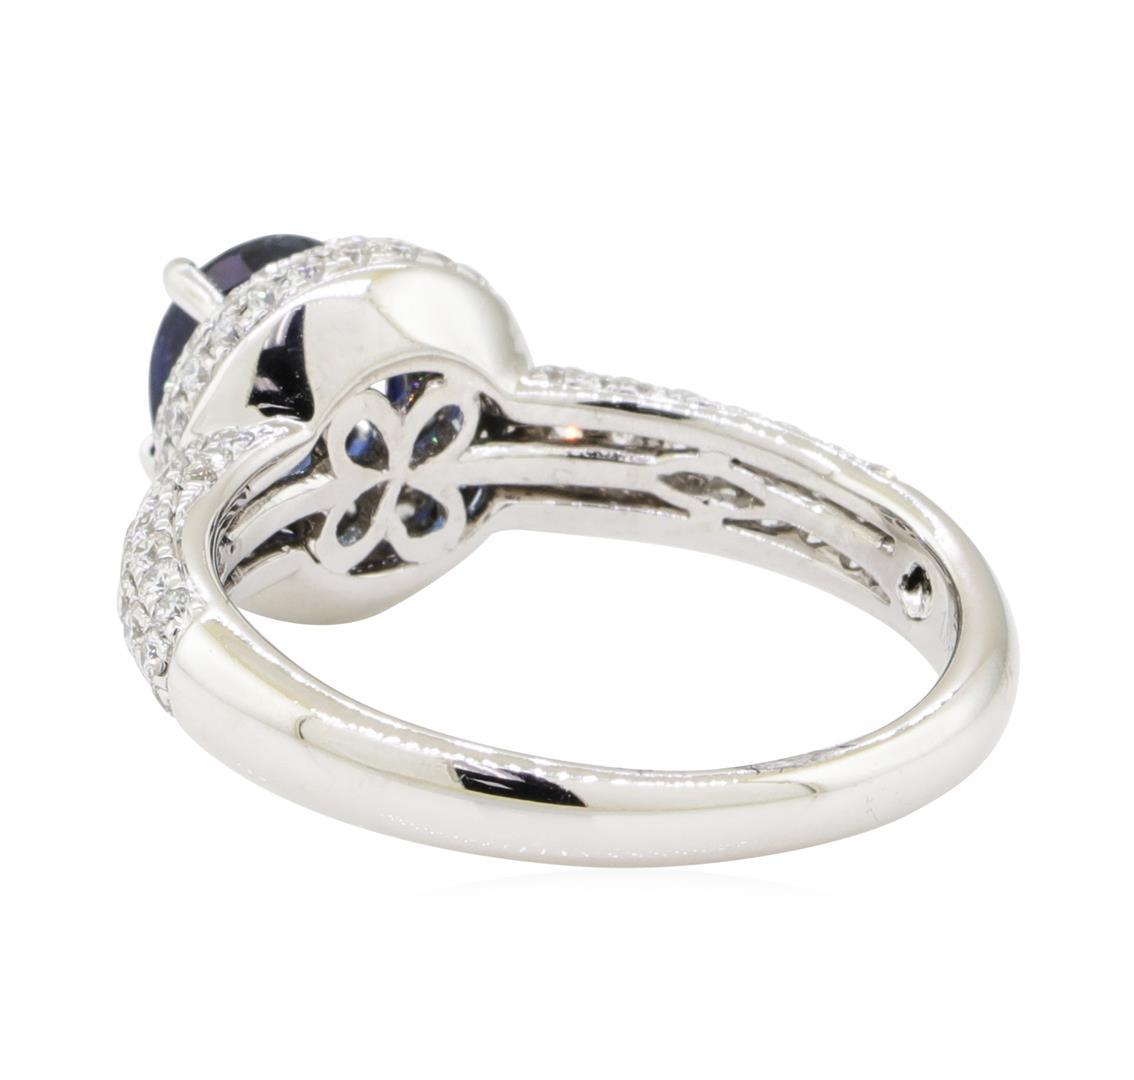 1.94 ctw Sapphire and Diamond Ring - 18KT White Gold